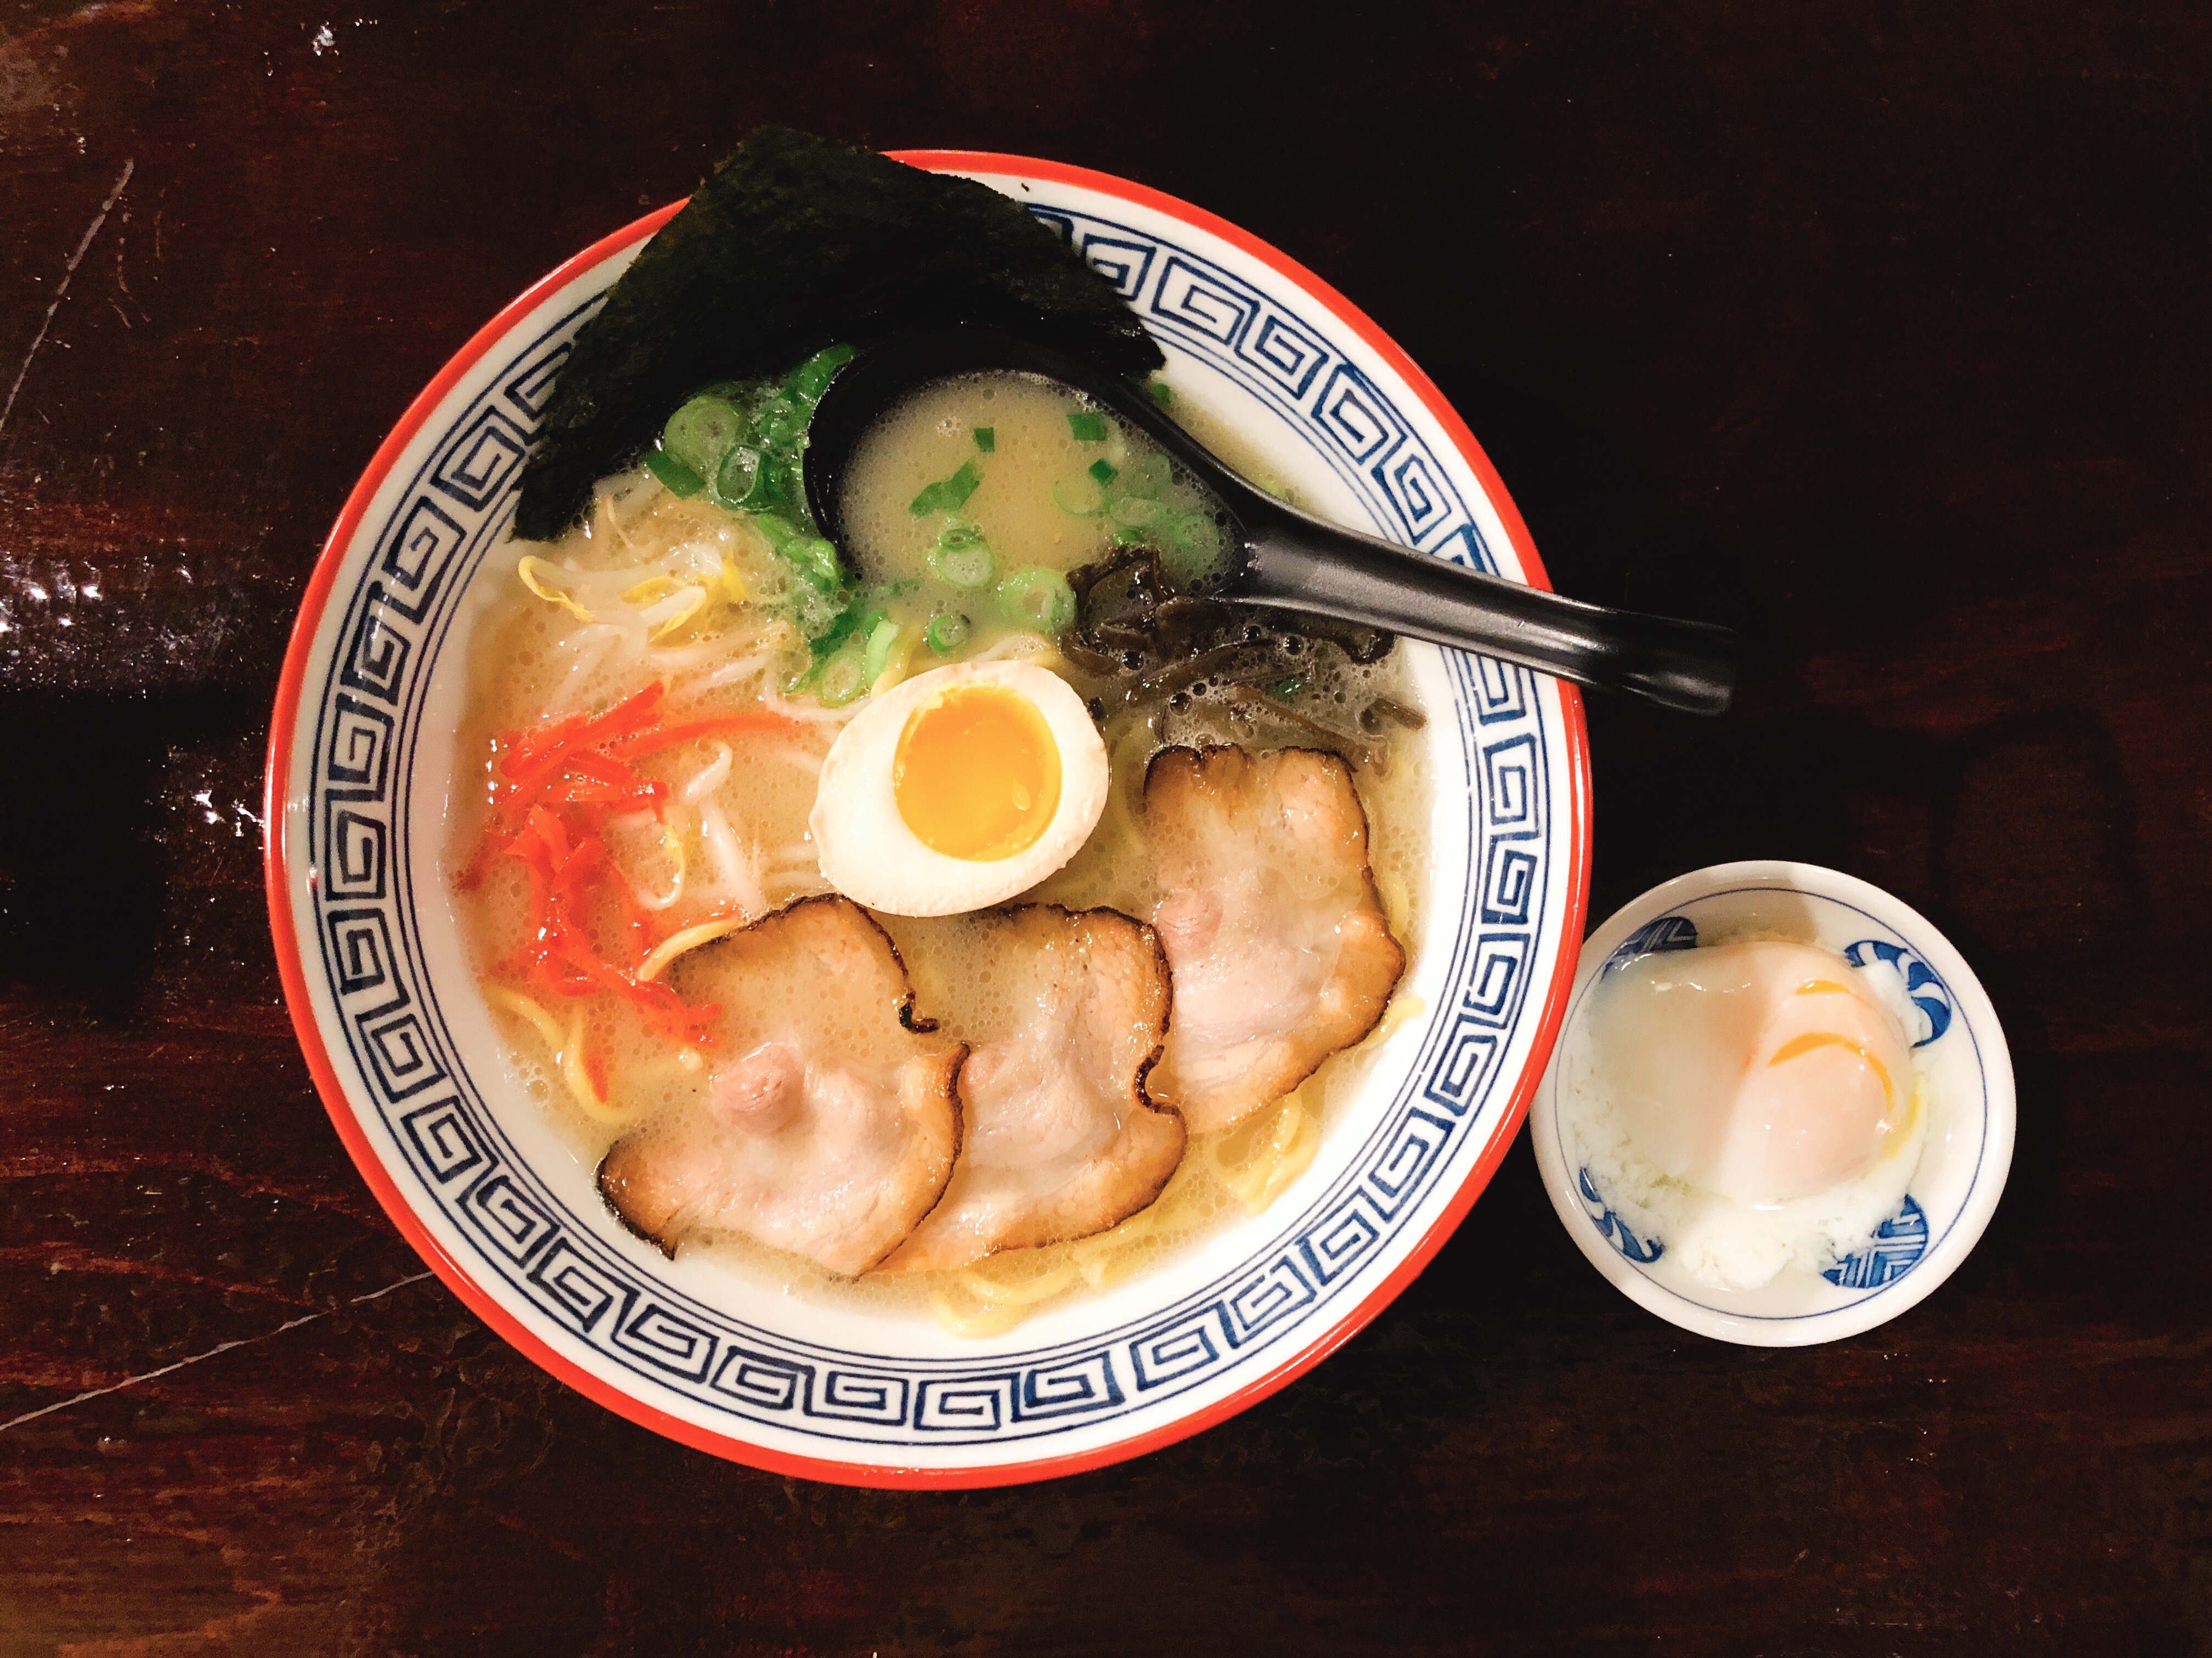 a bowl of ramen with a black spoon, slices of meat, chopped vegetables, and a soft egg